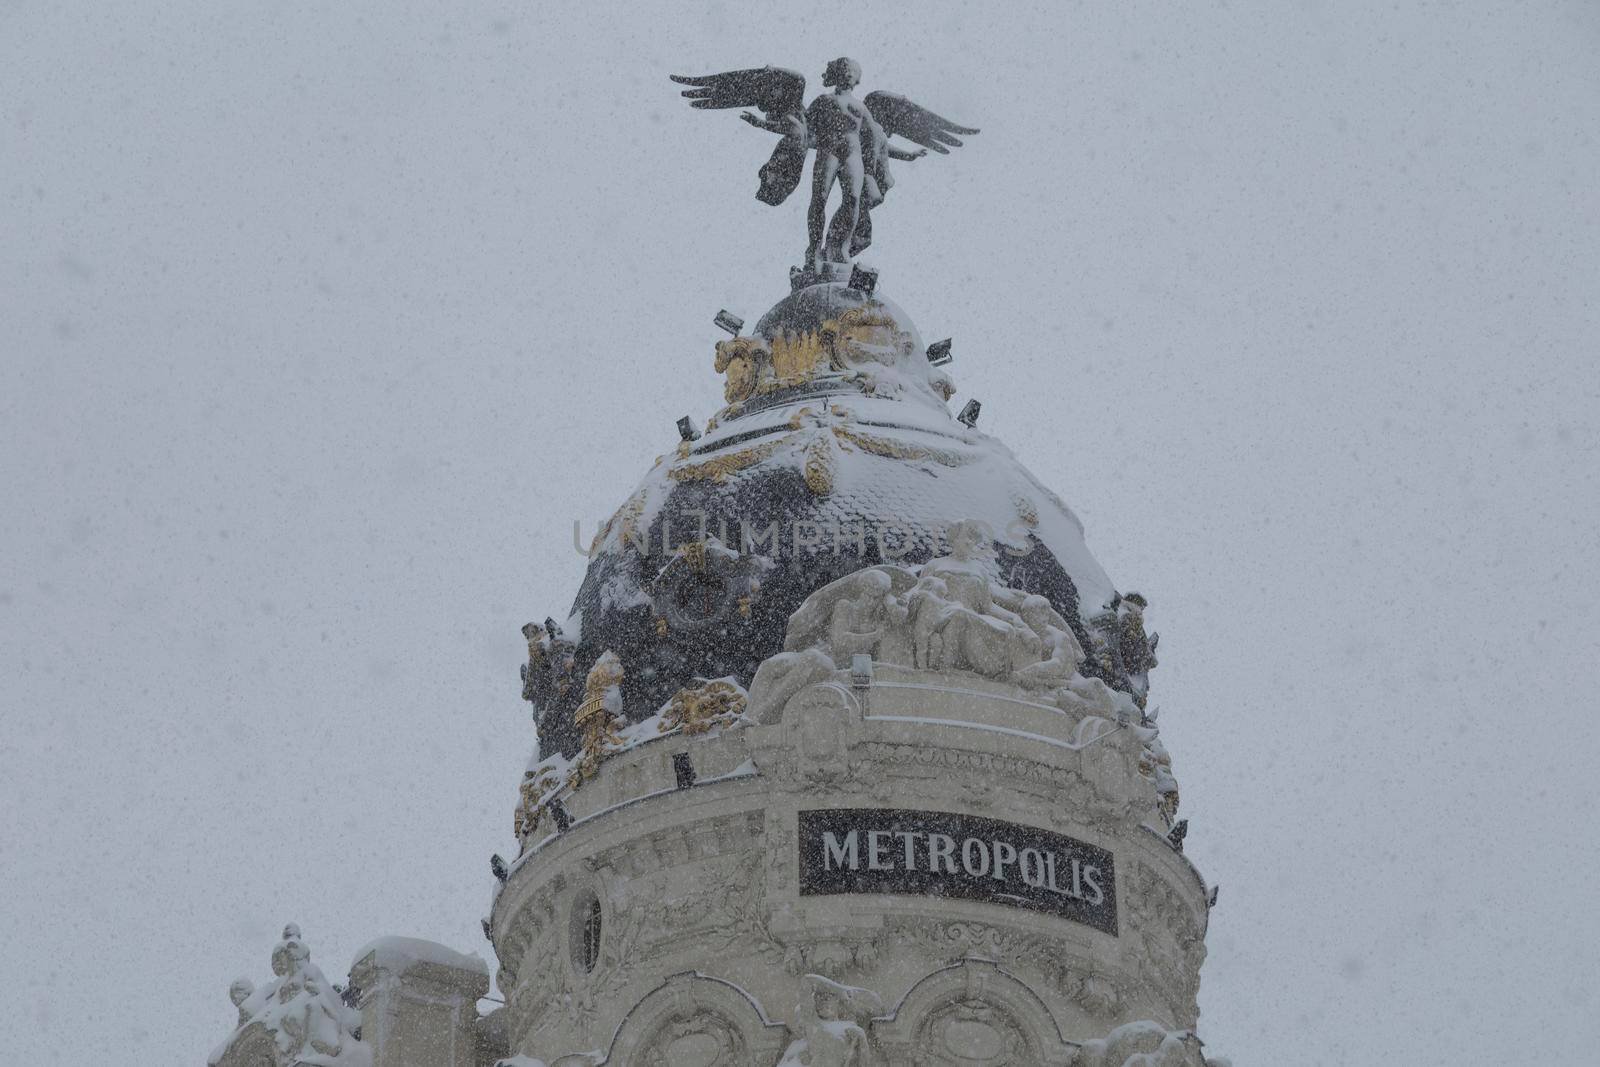 Madrid, Spain - January 09, 2021: Famous Metropolis building between Calle Alcala and Gran Via, on a snowy day, due to the Filomena polar cold front.